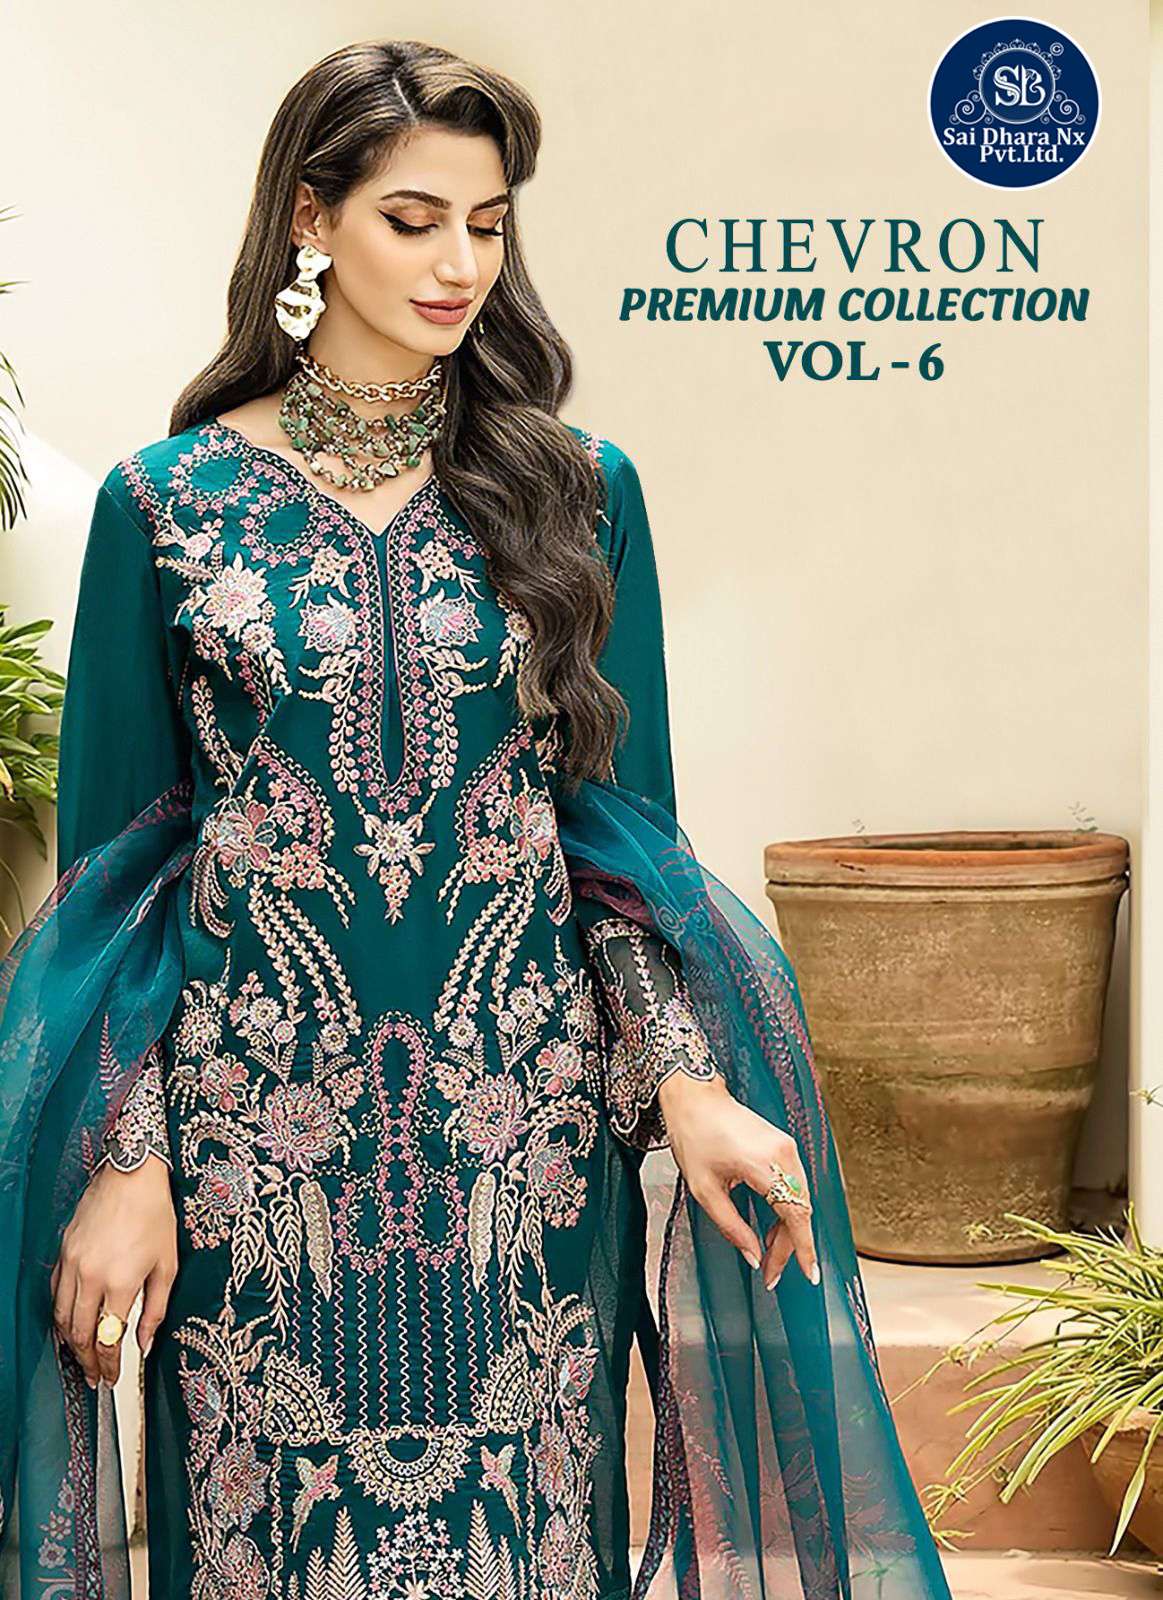 SHREE FABS PRESENTS TOP PURE HEAVY REYON WITH SELF EMBROIDERY PAKISTANI SUIT MATERIAL WHOLESALE SHOP IN SURAT - SaiDharaNx